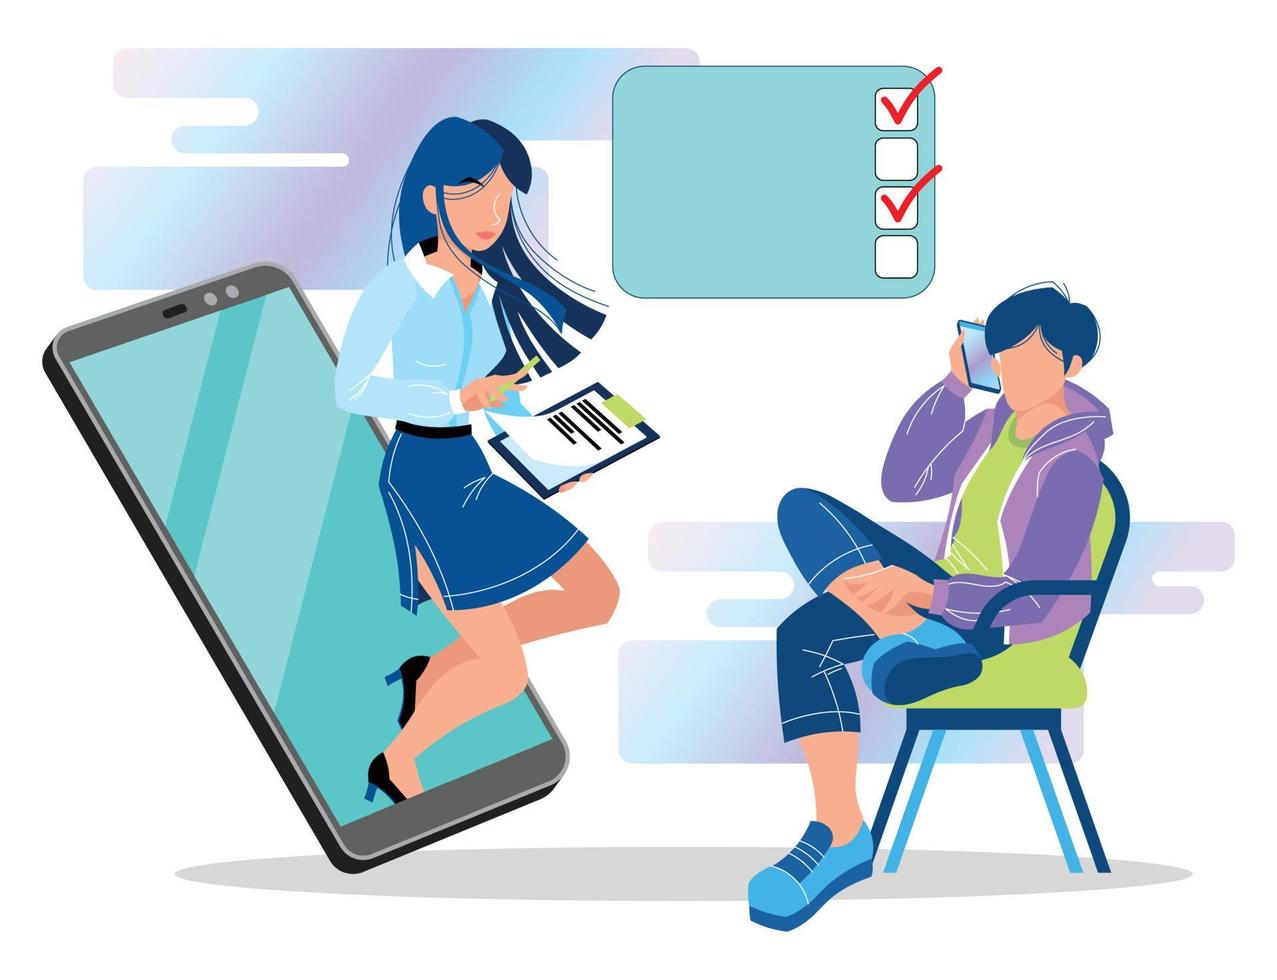 Business proposal over the phone. Calling clients with a list of services from the company. Talking on the phone of a man and a girl in an office style. vector